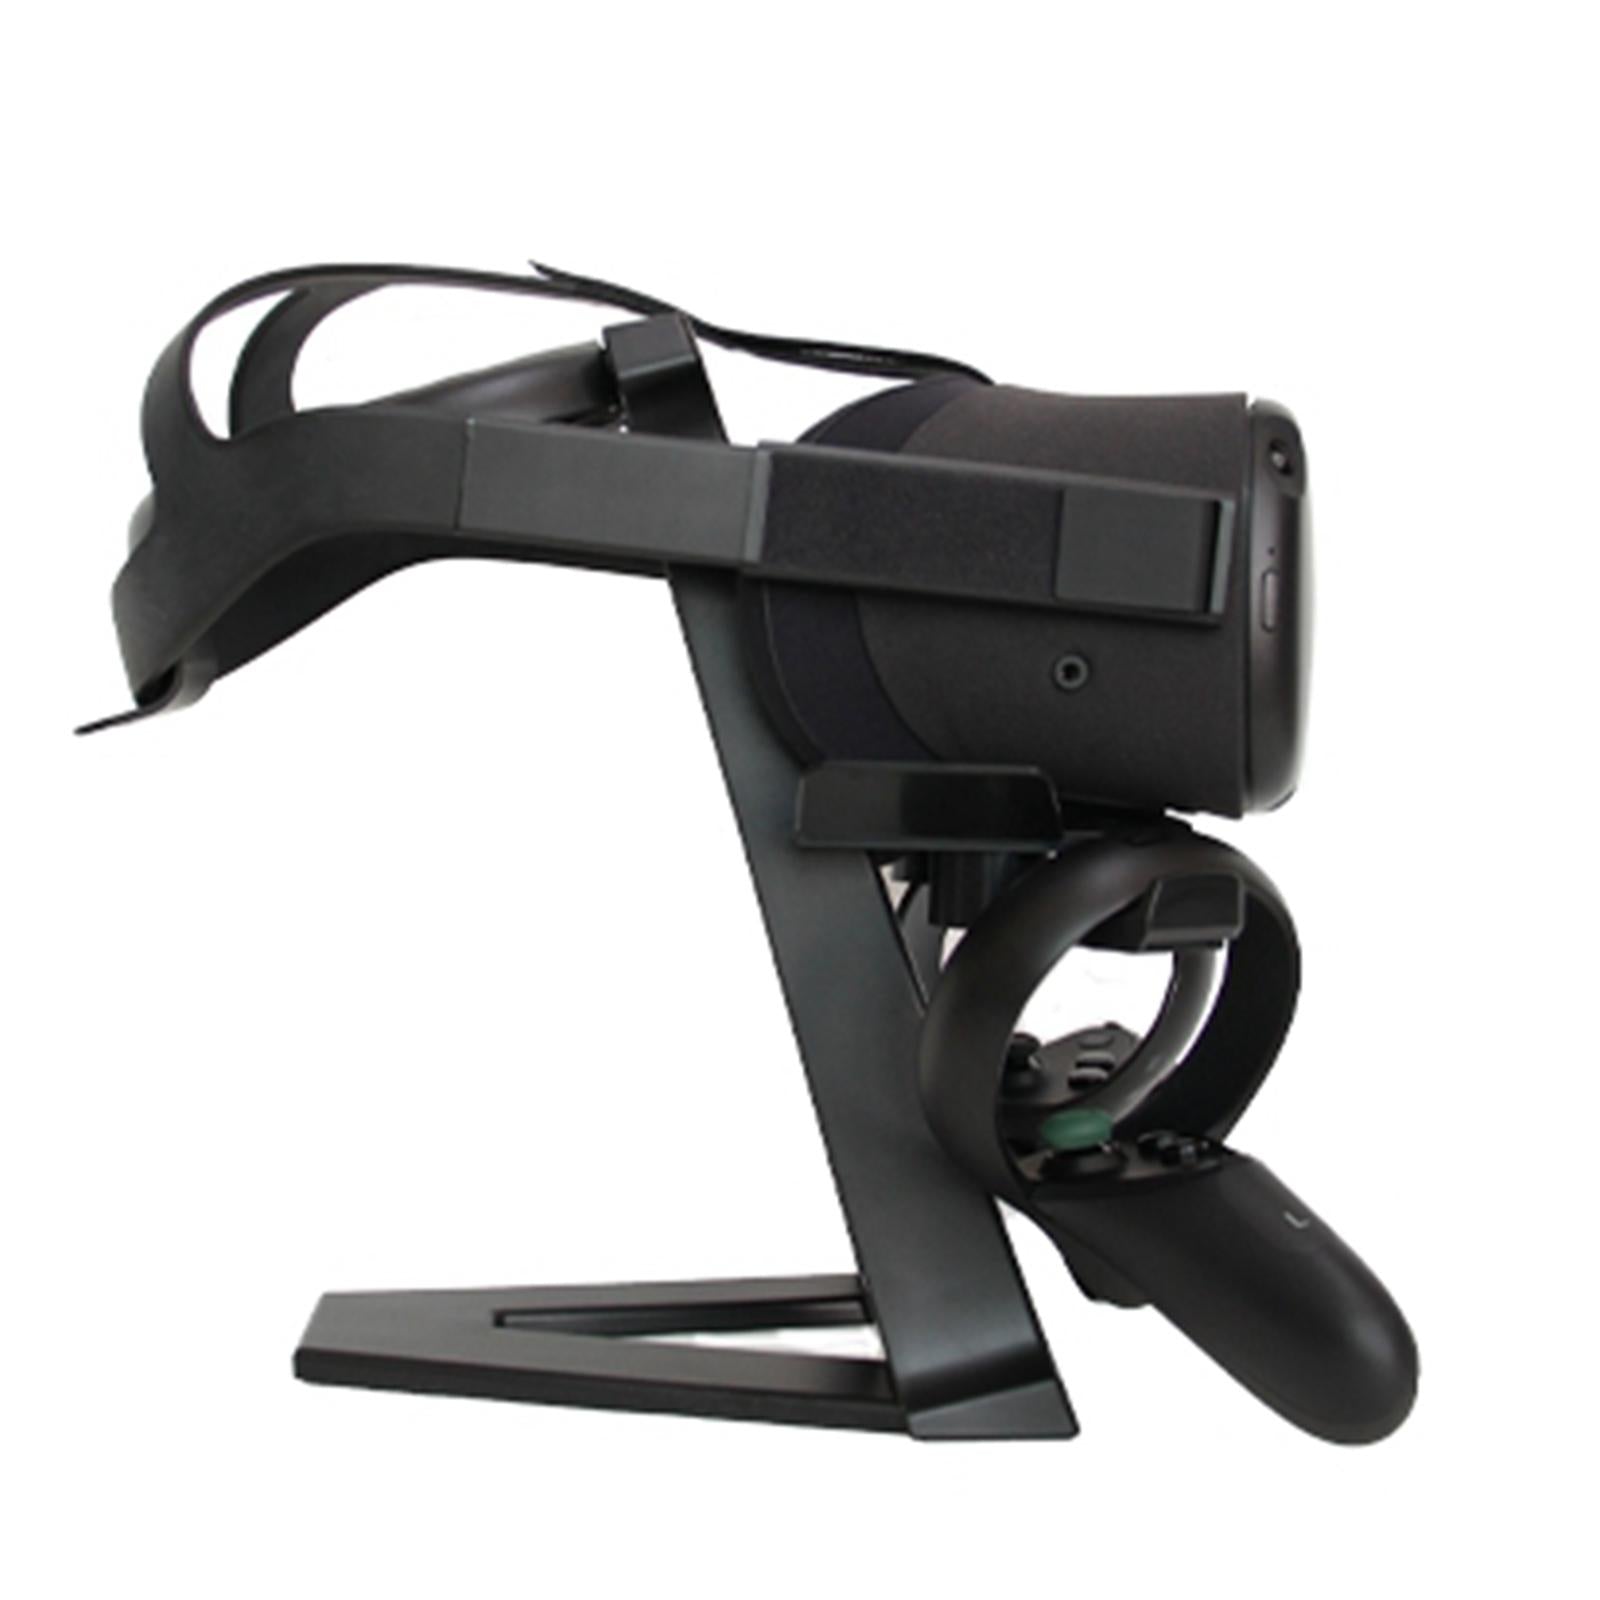 Universal VR Stand Headset and Controllers Holder for Oculus Quest 2 black